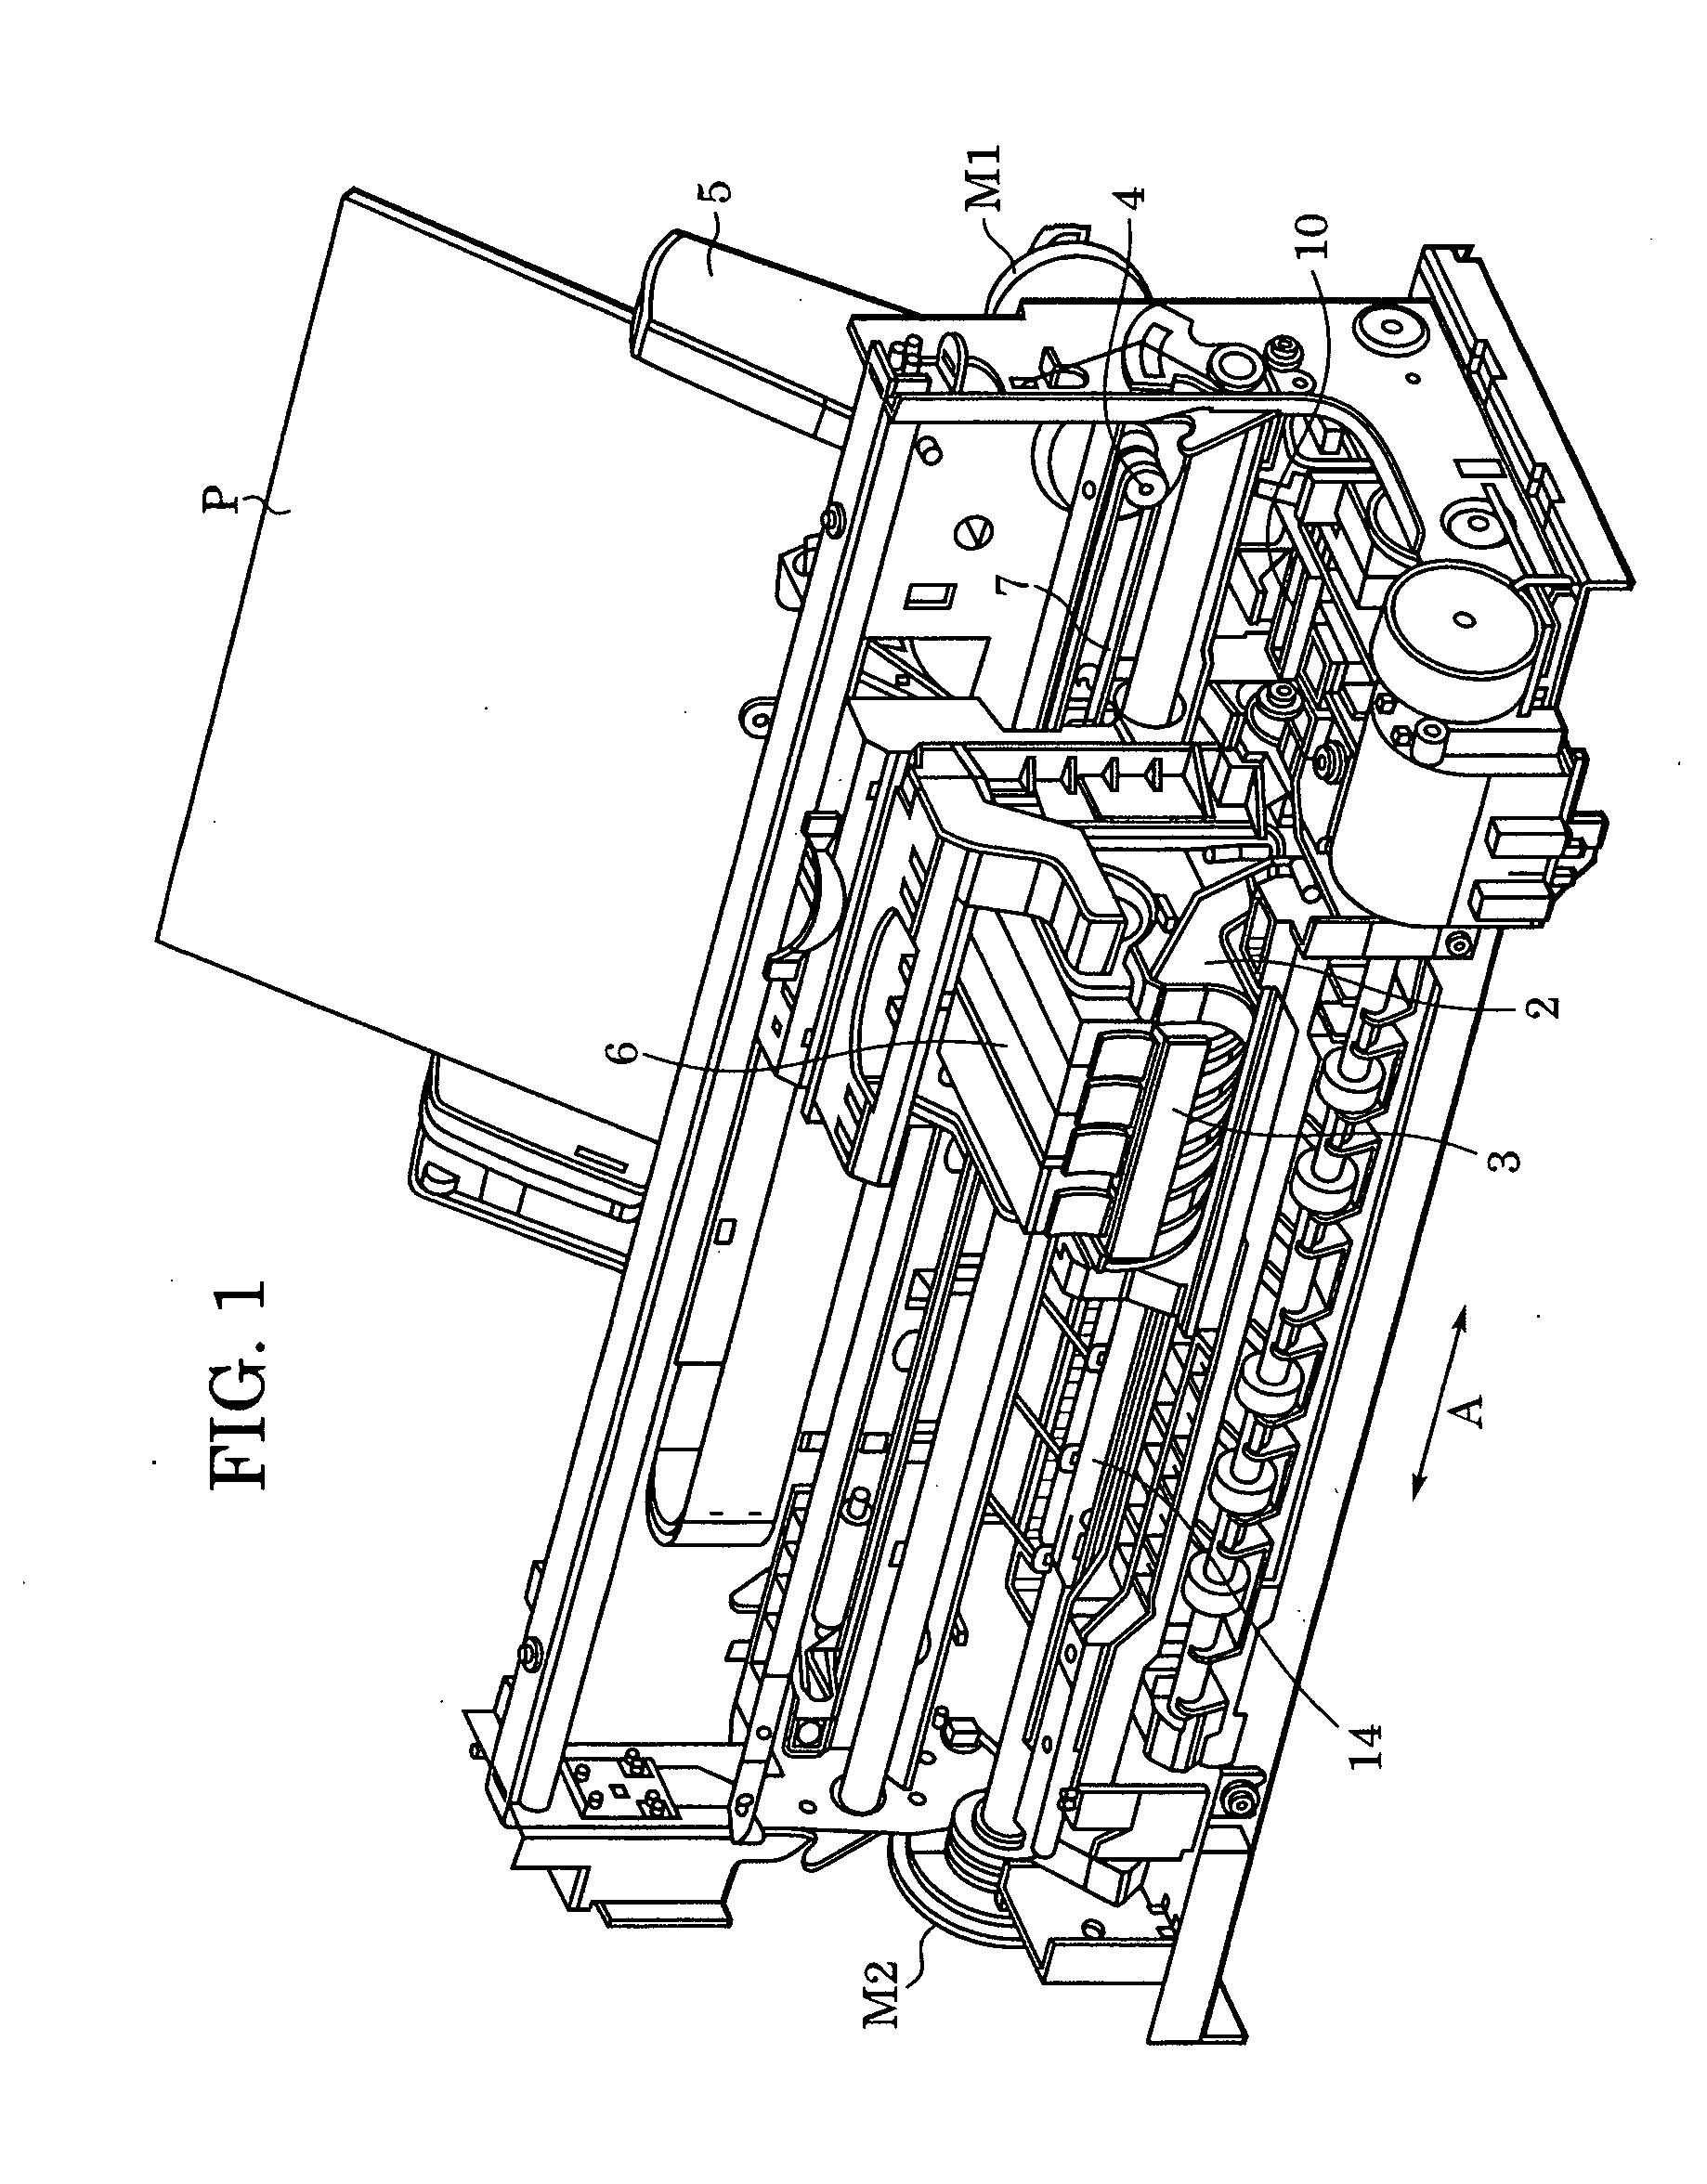 Element substrate, recording head using the element substrate, and recording apparatus